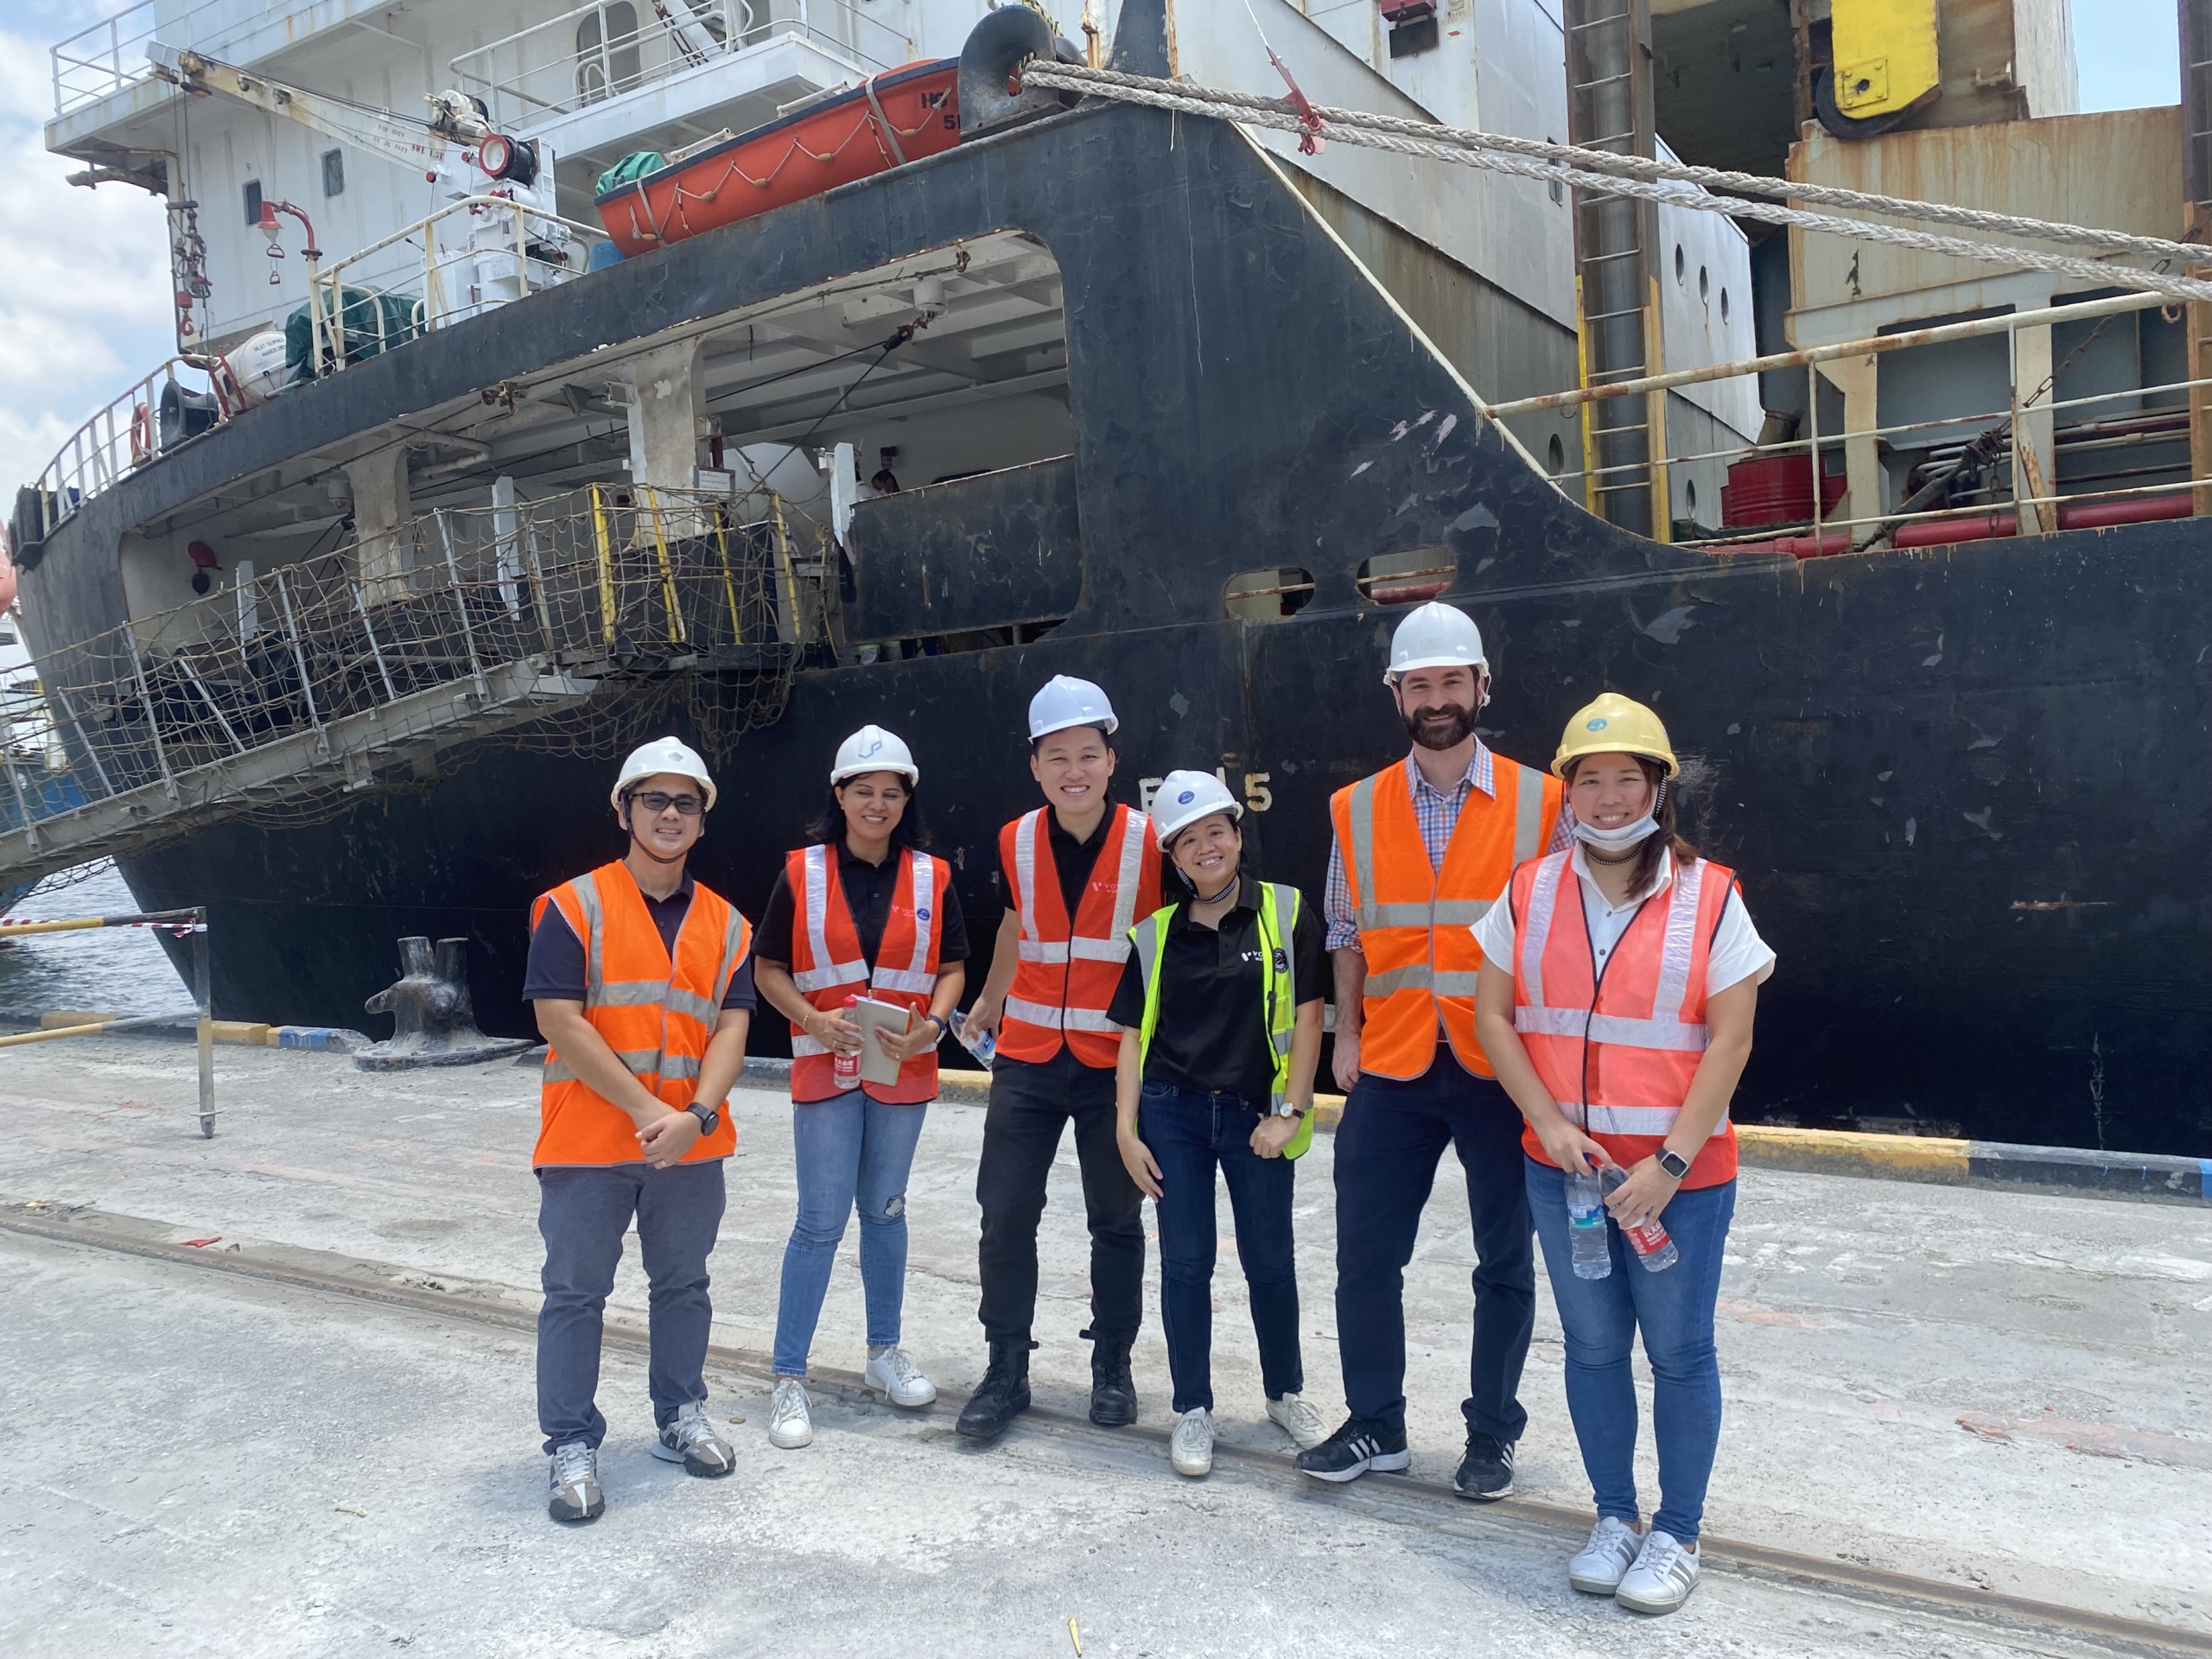 Voyager Worldwide celebrates World Maritime Day with Mission to Seafarers